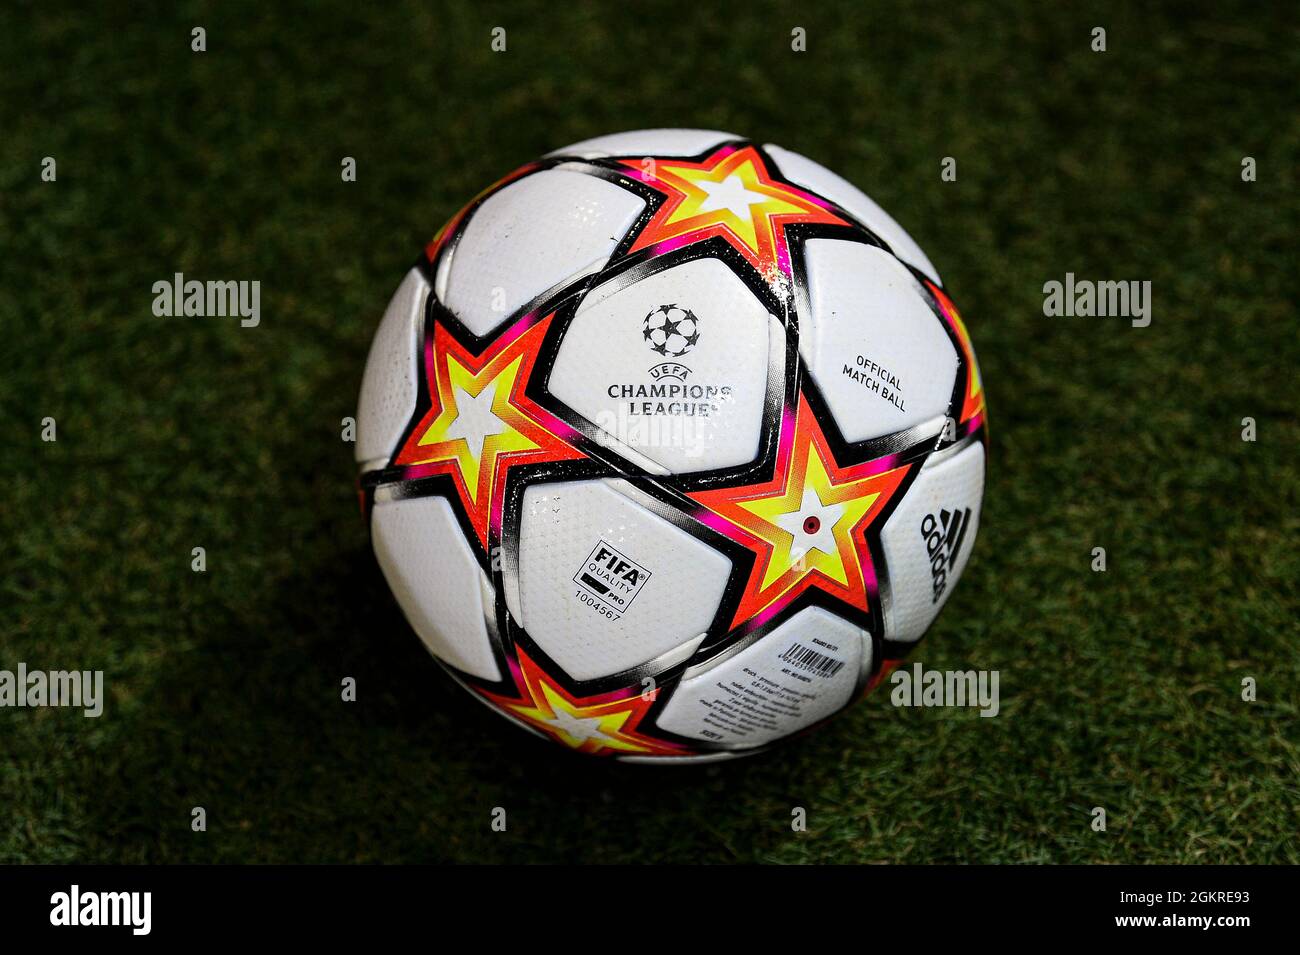 Malmo, Sweden. 14 September 2021. The official UEFA Champions League  2021-2022 match ball Adidas 'Pyrostorm' is seen prior to the UEFA Champions  League football match between Malmo FF and Juventus FC. Credit: